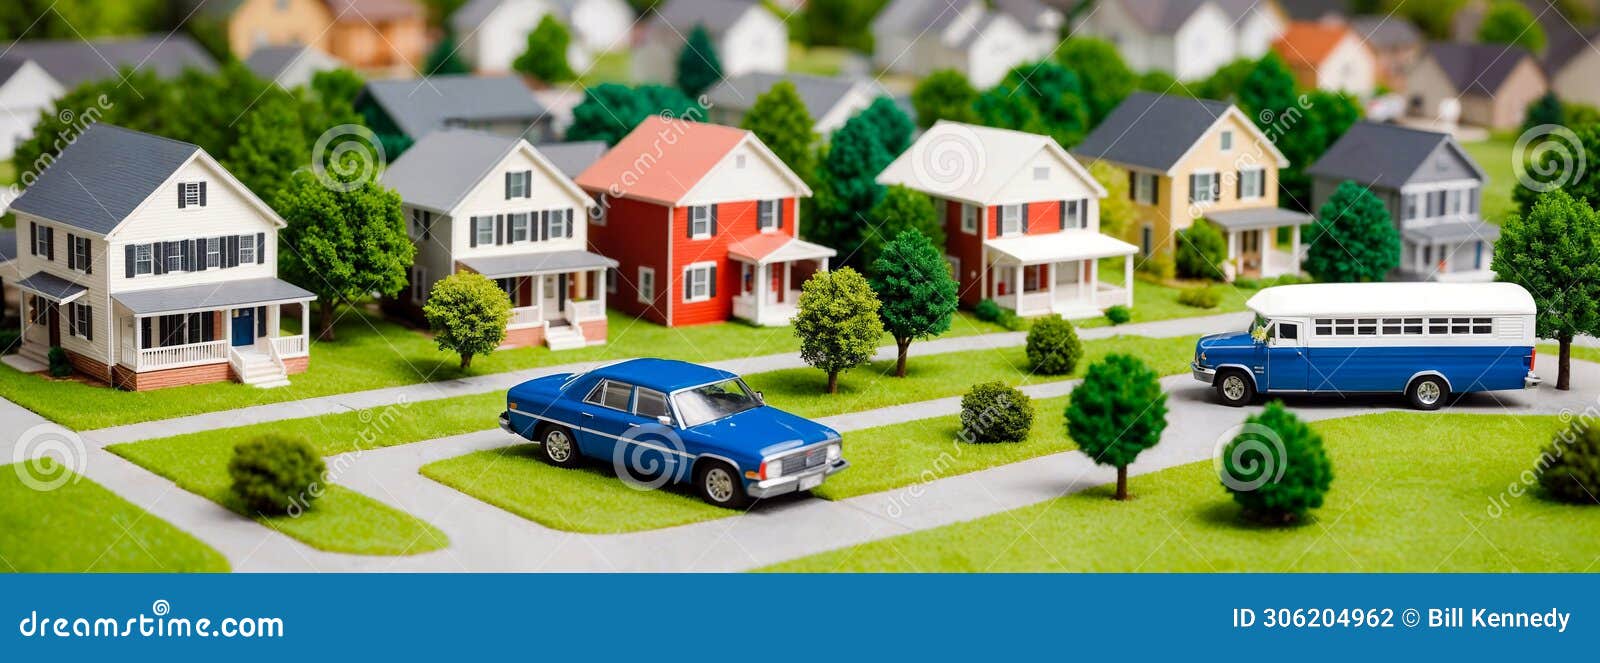 diorama of small homes on a tree-lined street